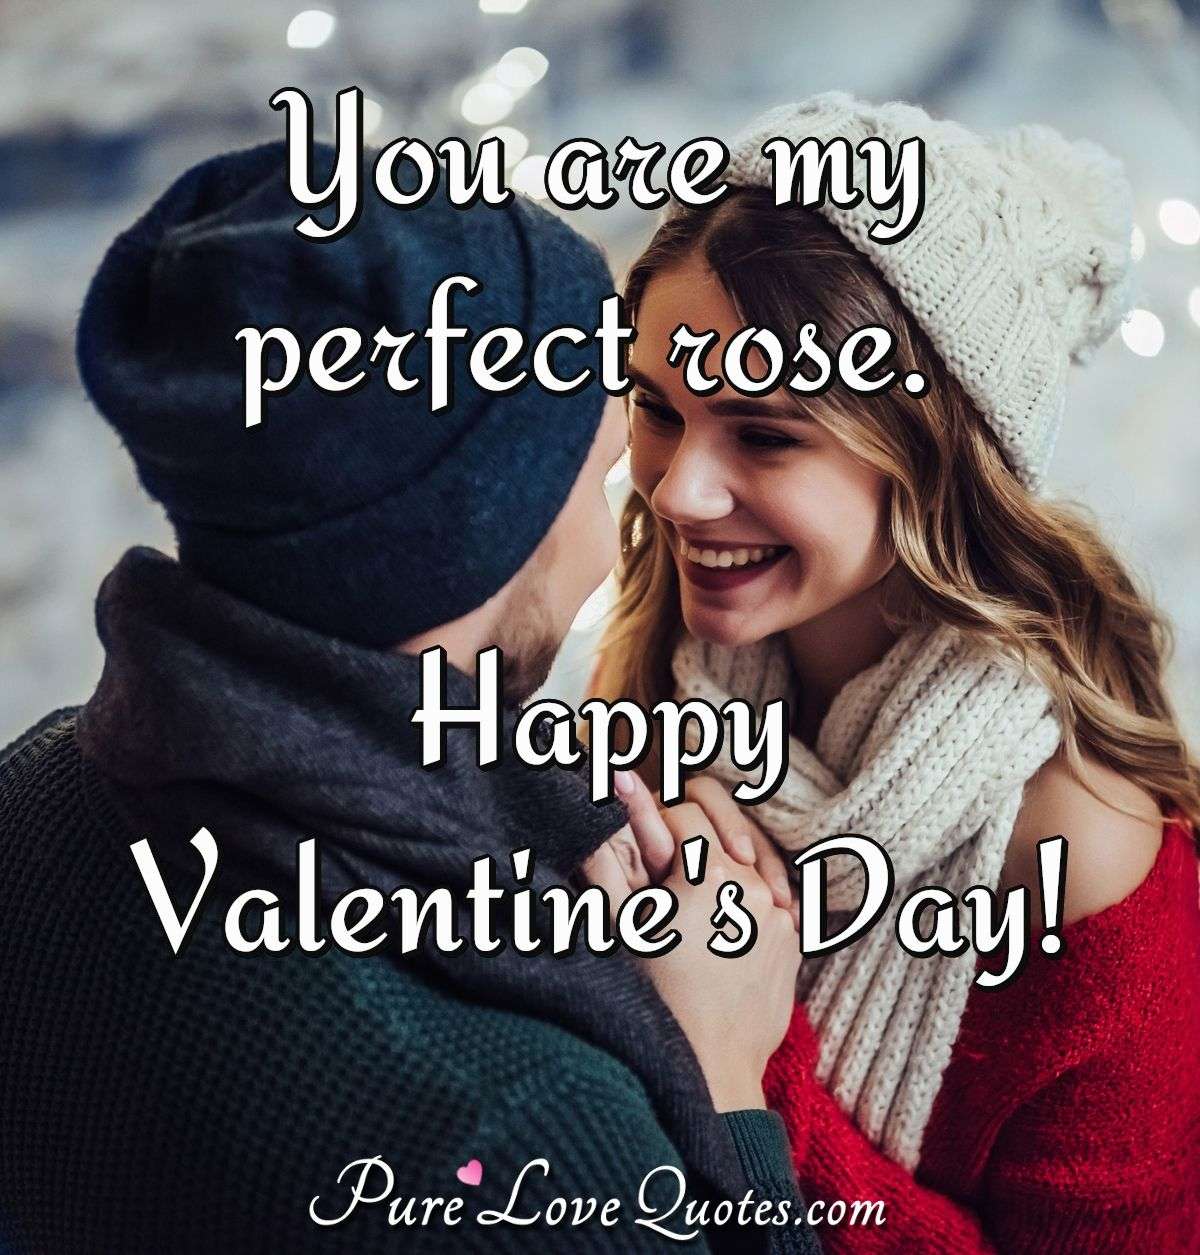 You are my perfect rose. Happy Valentine's Day! - Anonymous